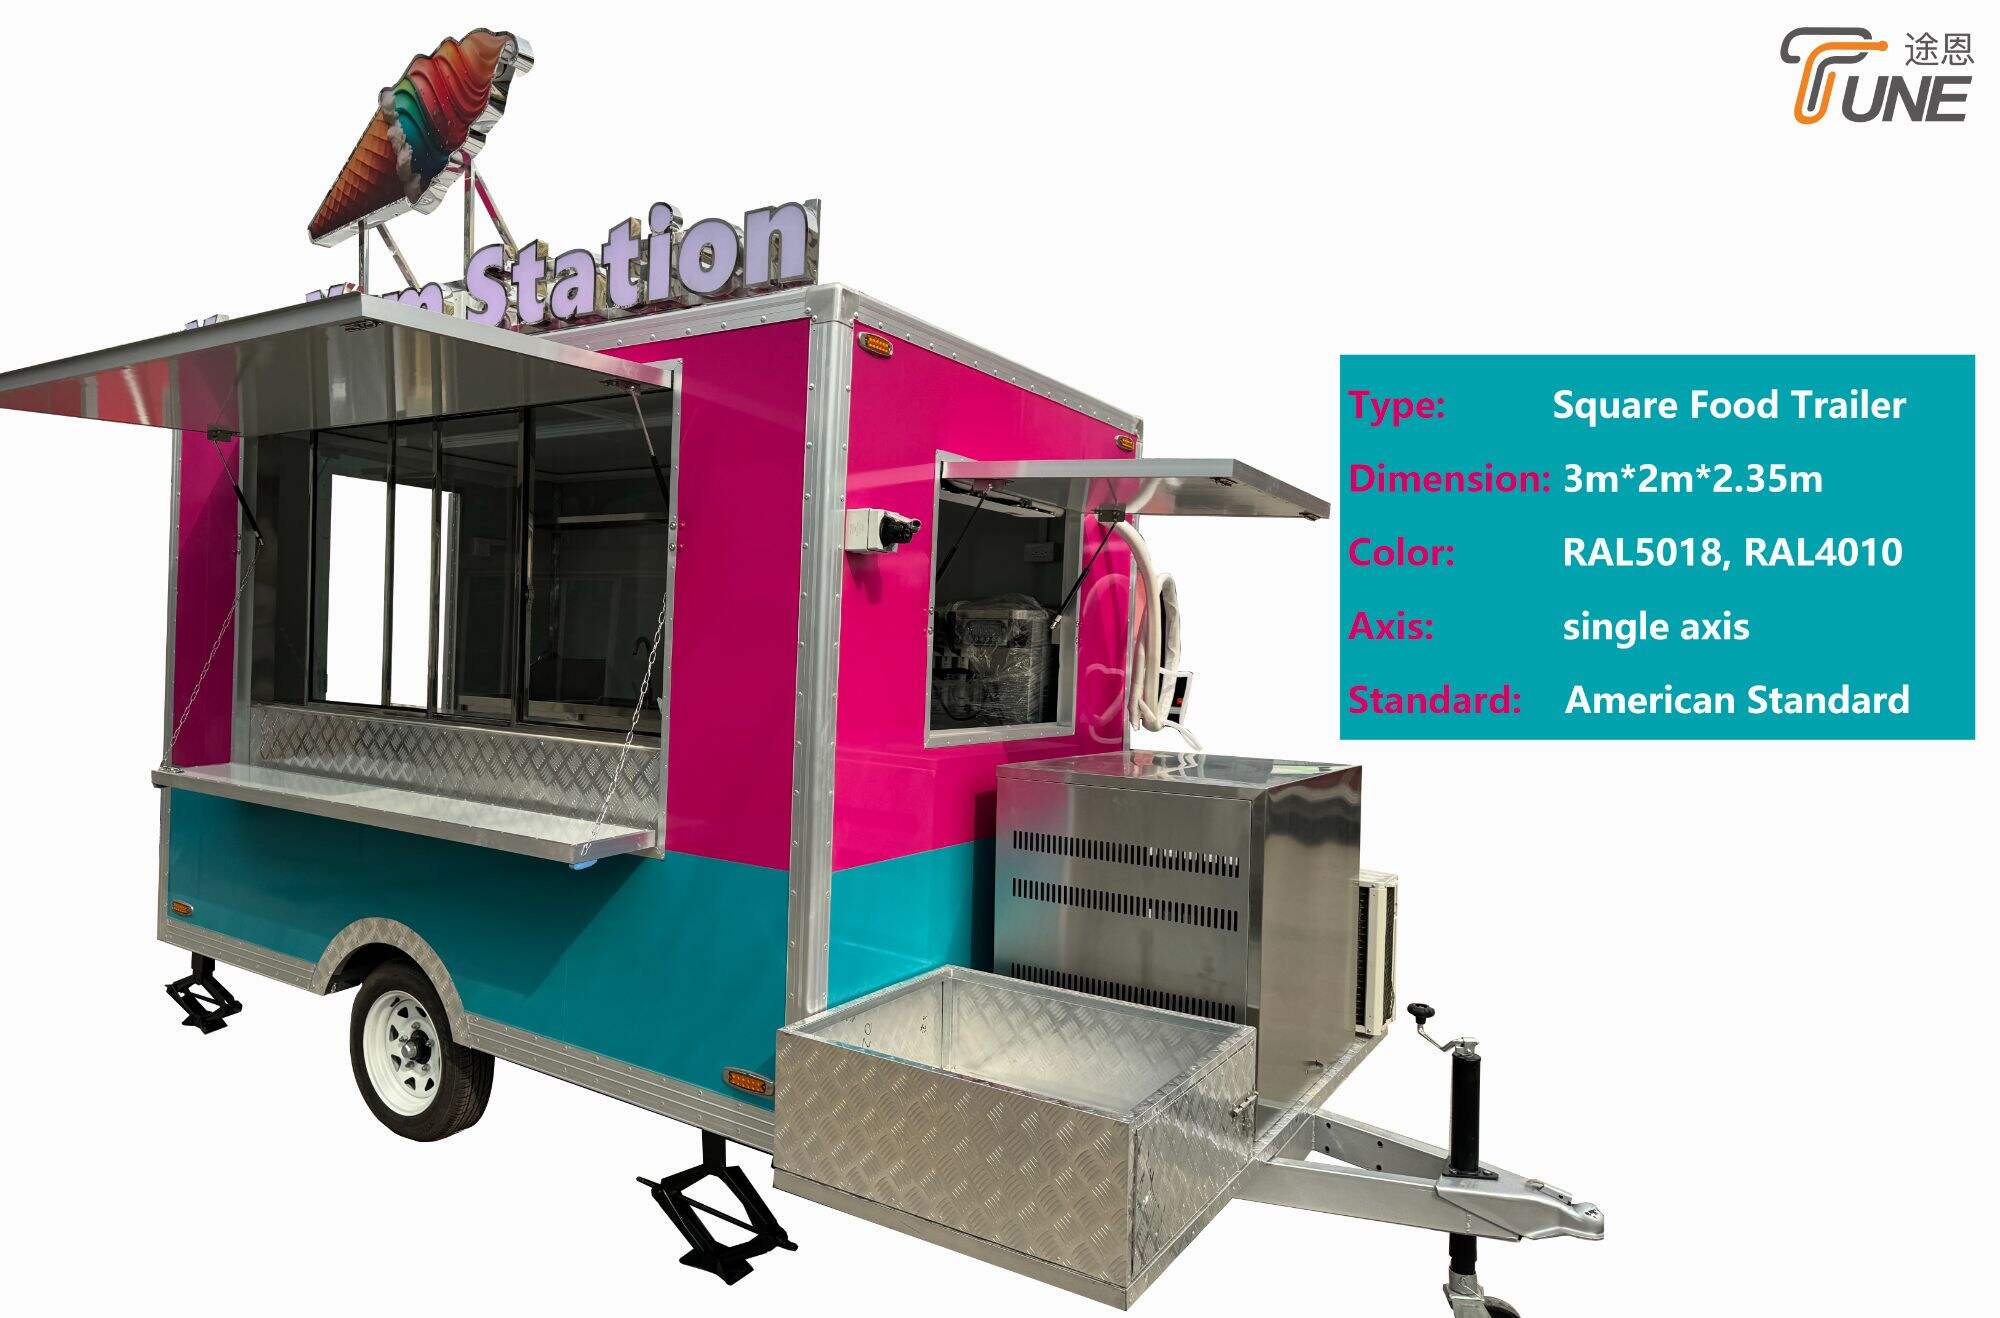 TUNE new product released: candy color 3m square trailer